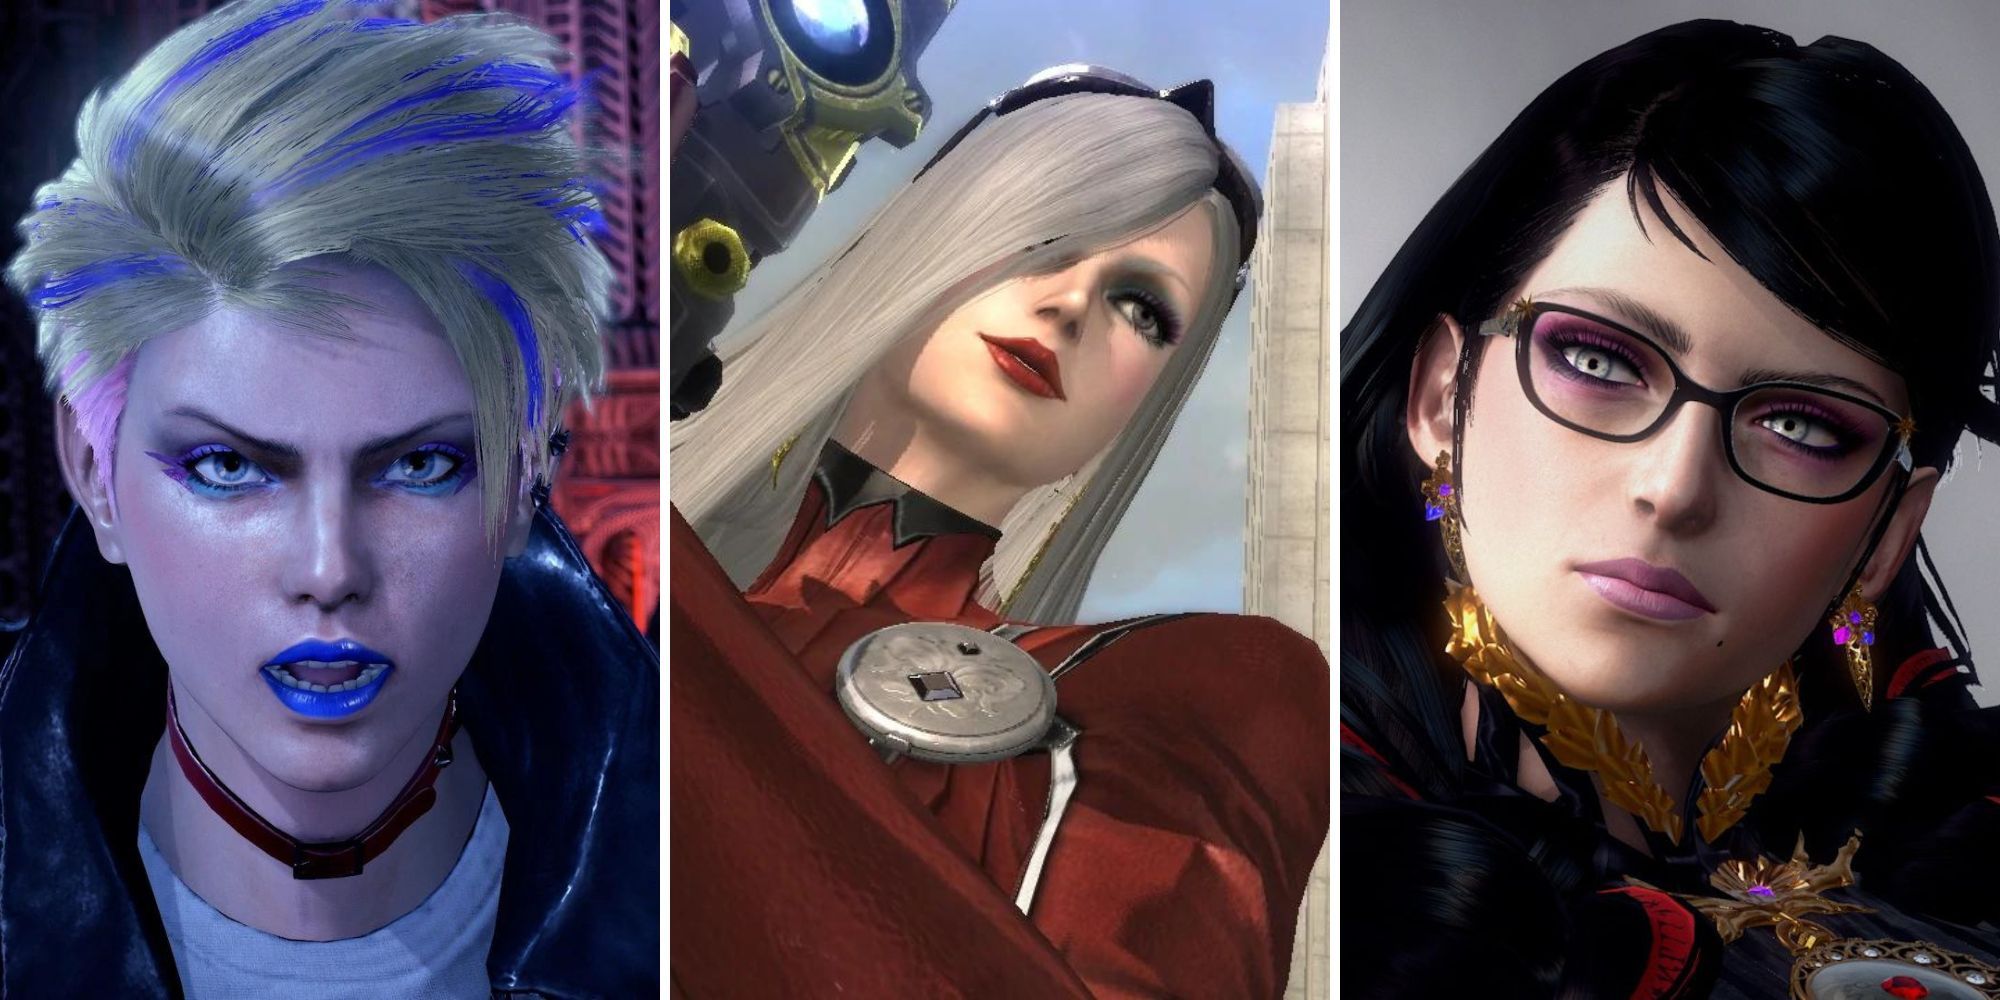 A grid of images showing the characters Viola, Jeanne and Bayonetta from the game series Bayonetta